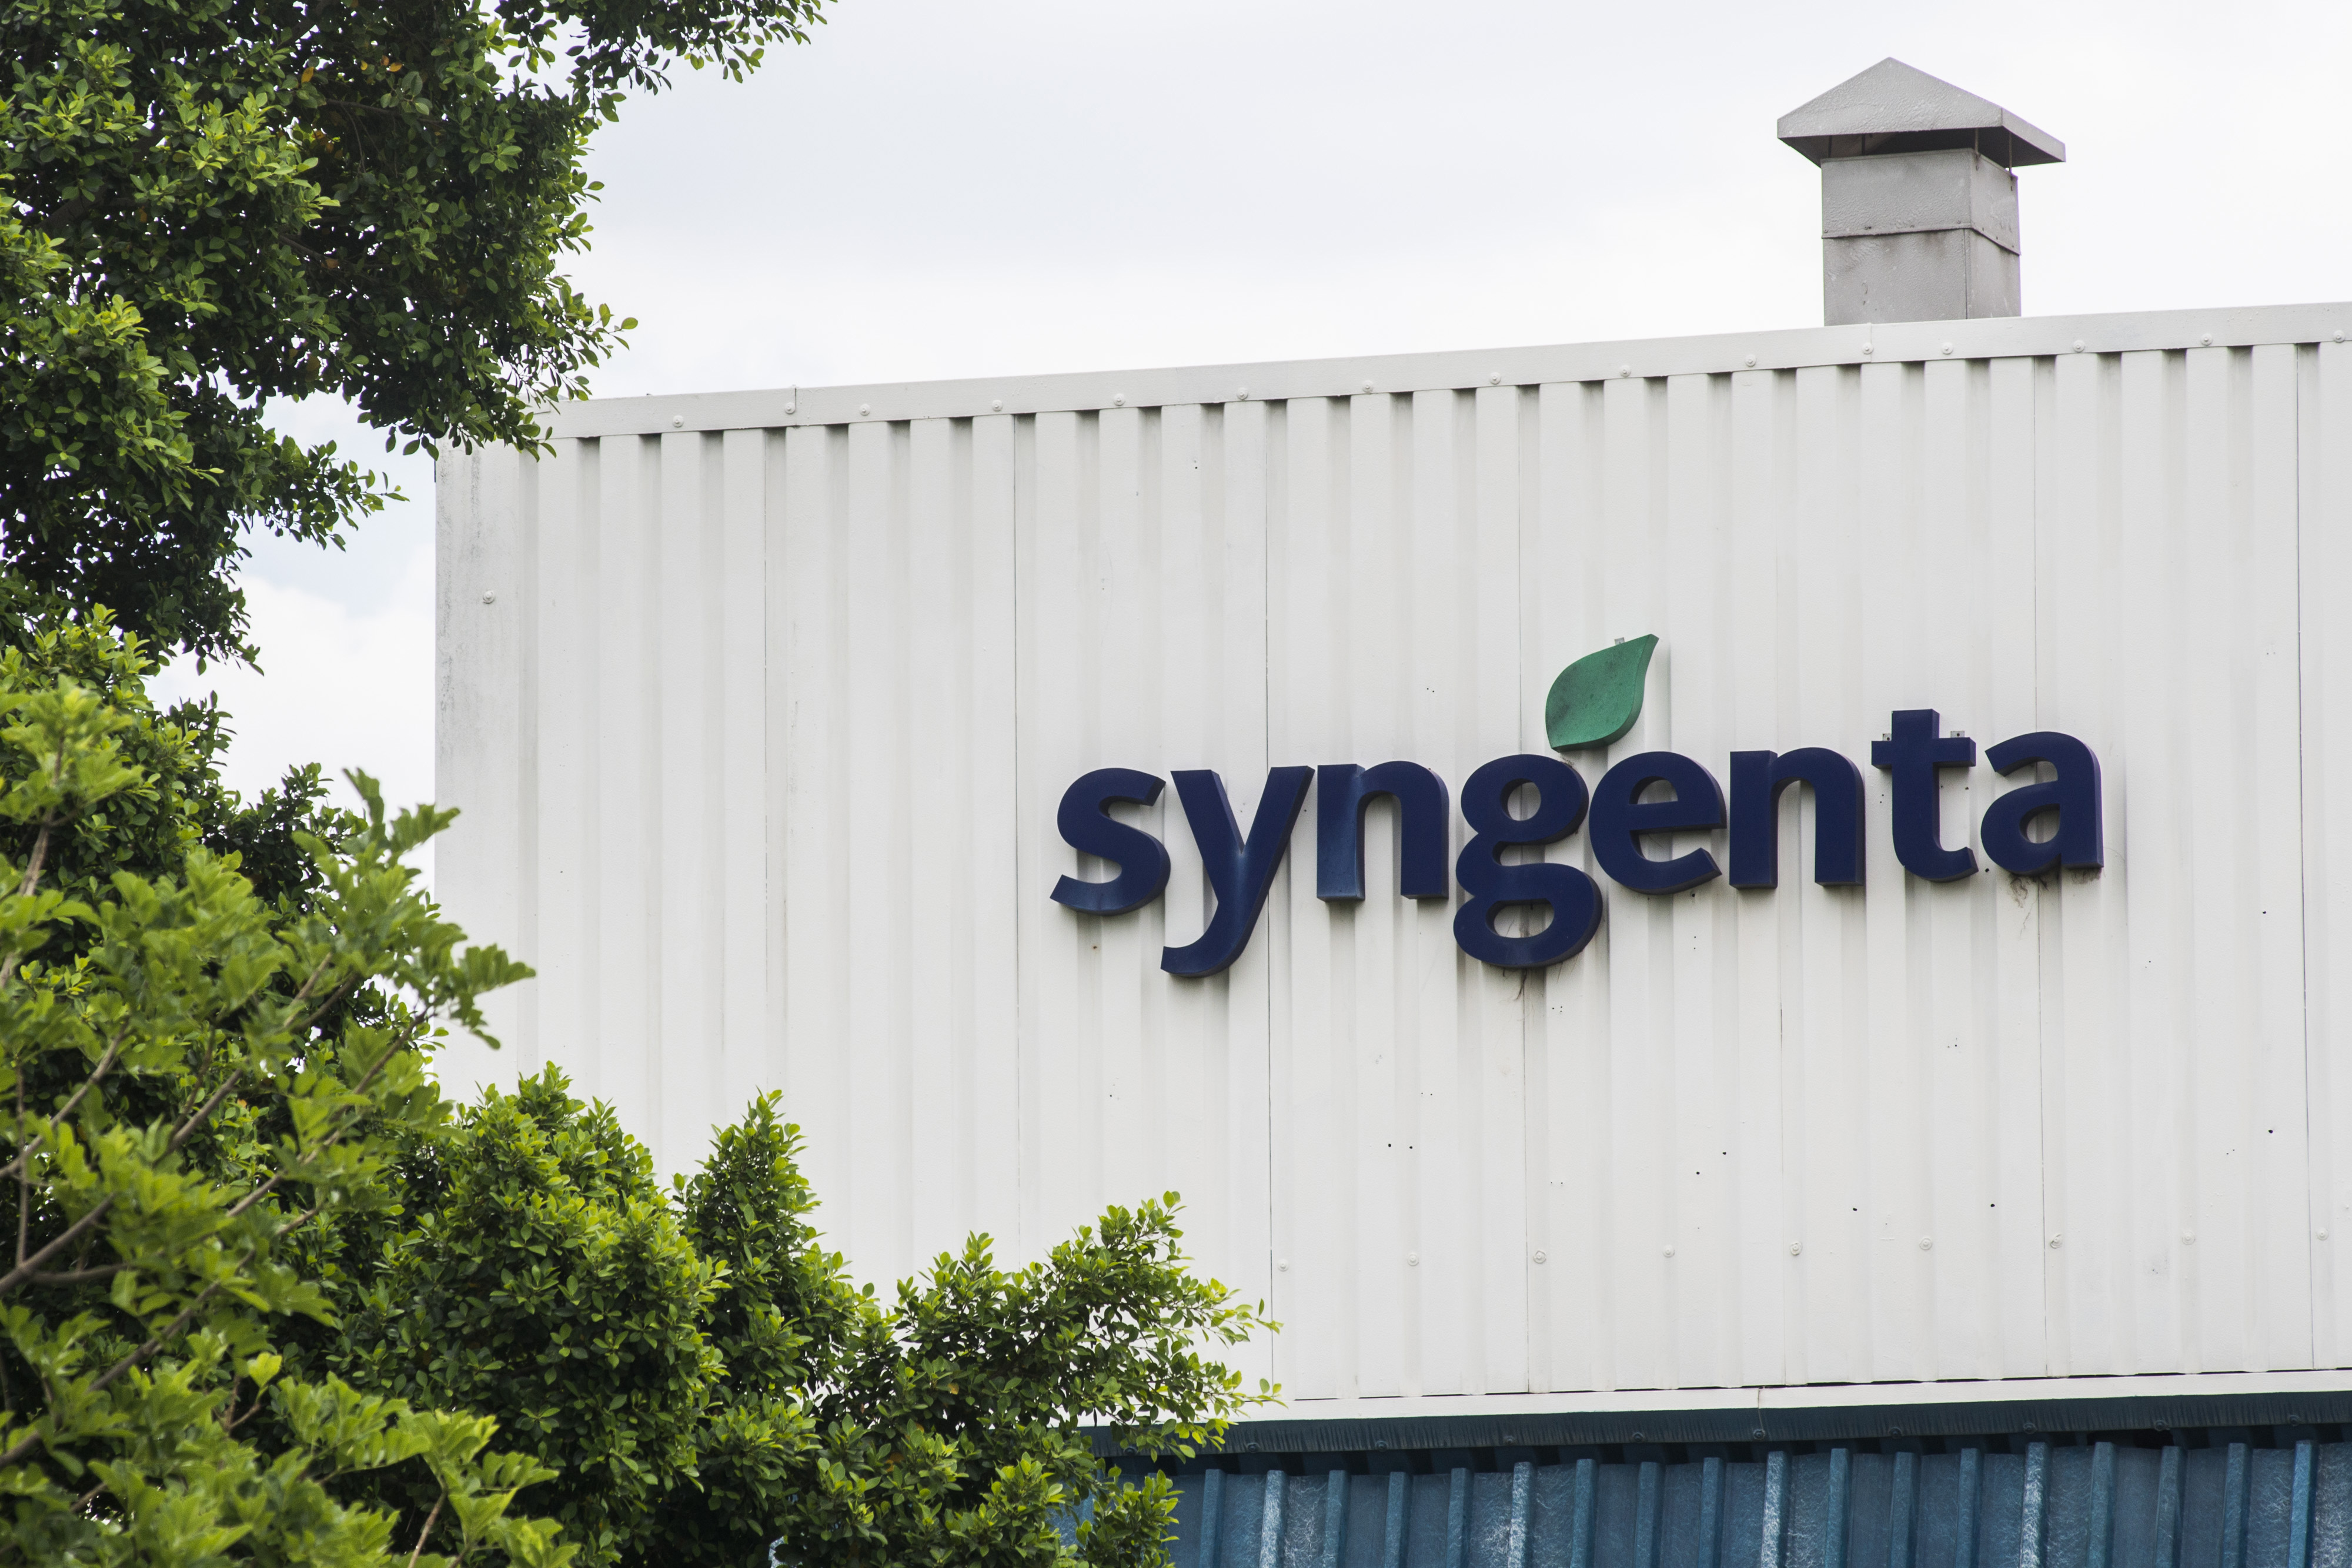 A logo sits on display outside the Syngenta AG plant in Brits, South Africa, on Wednesday, Feb. 3, 2016. (Waldo Swiegers—Bloomberg/Getty Images)